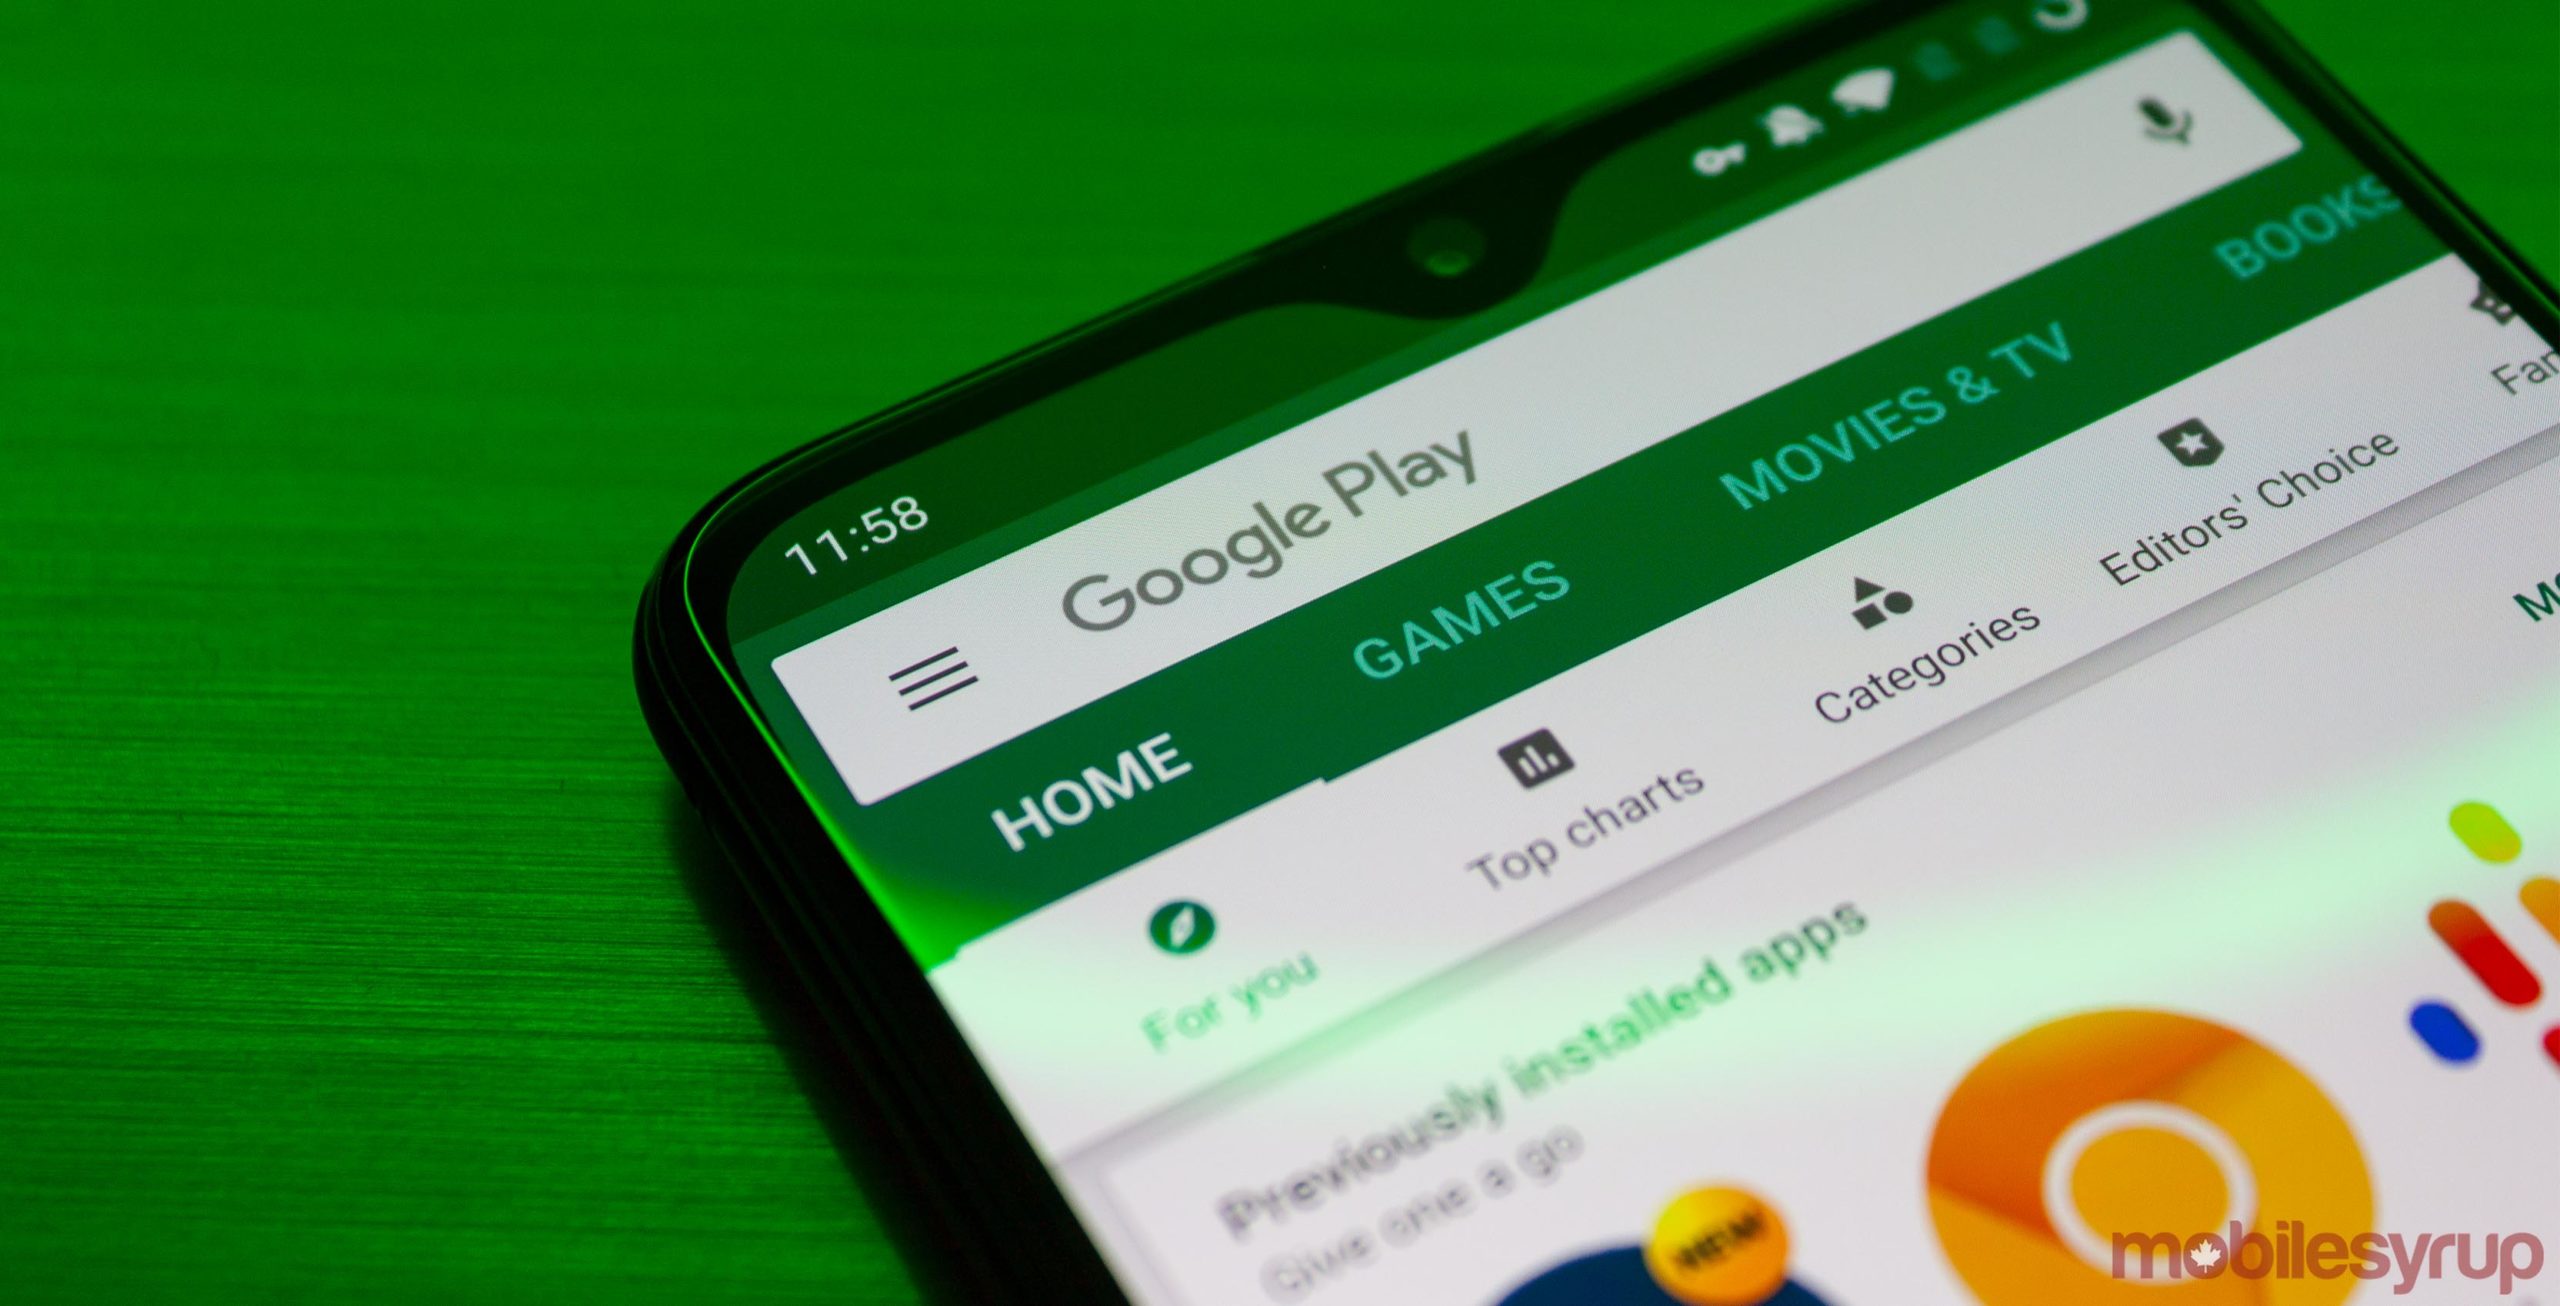 Google Play hides search results for ‘corona virus’ Android apps